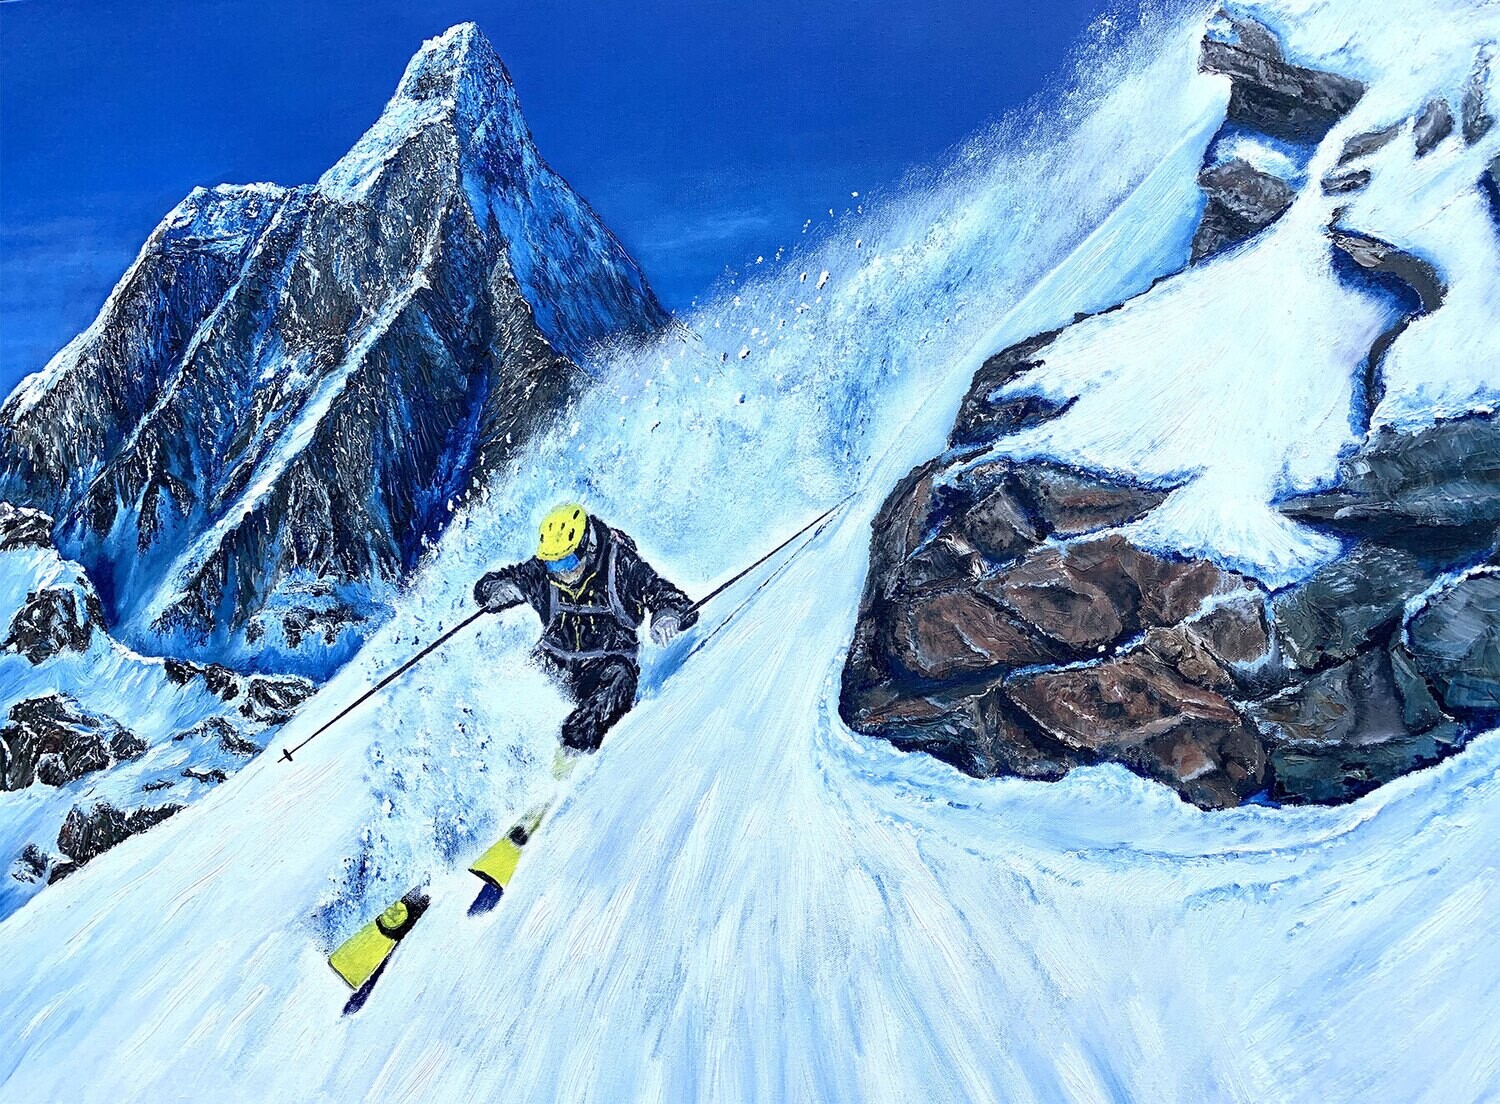 "Steep and Deep" 40 x 30 inches, Mike S. Commission